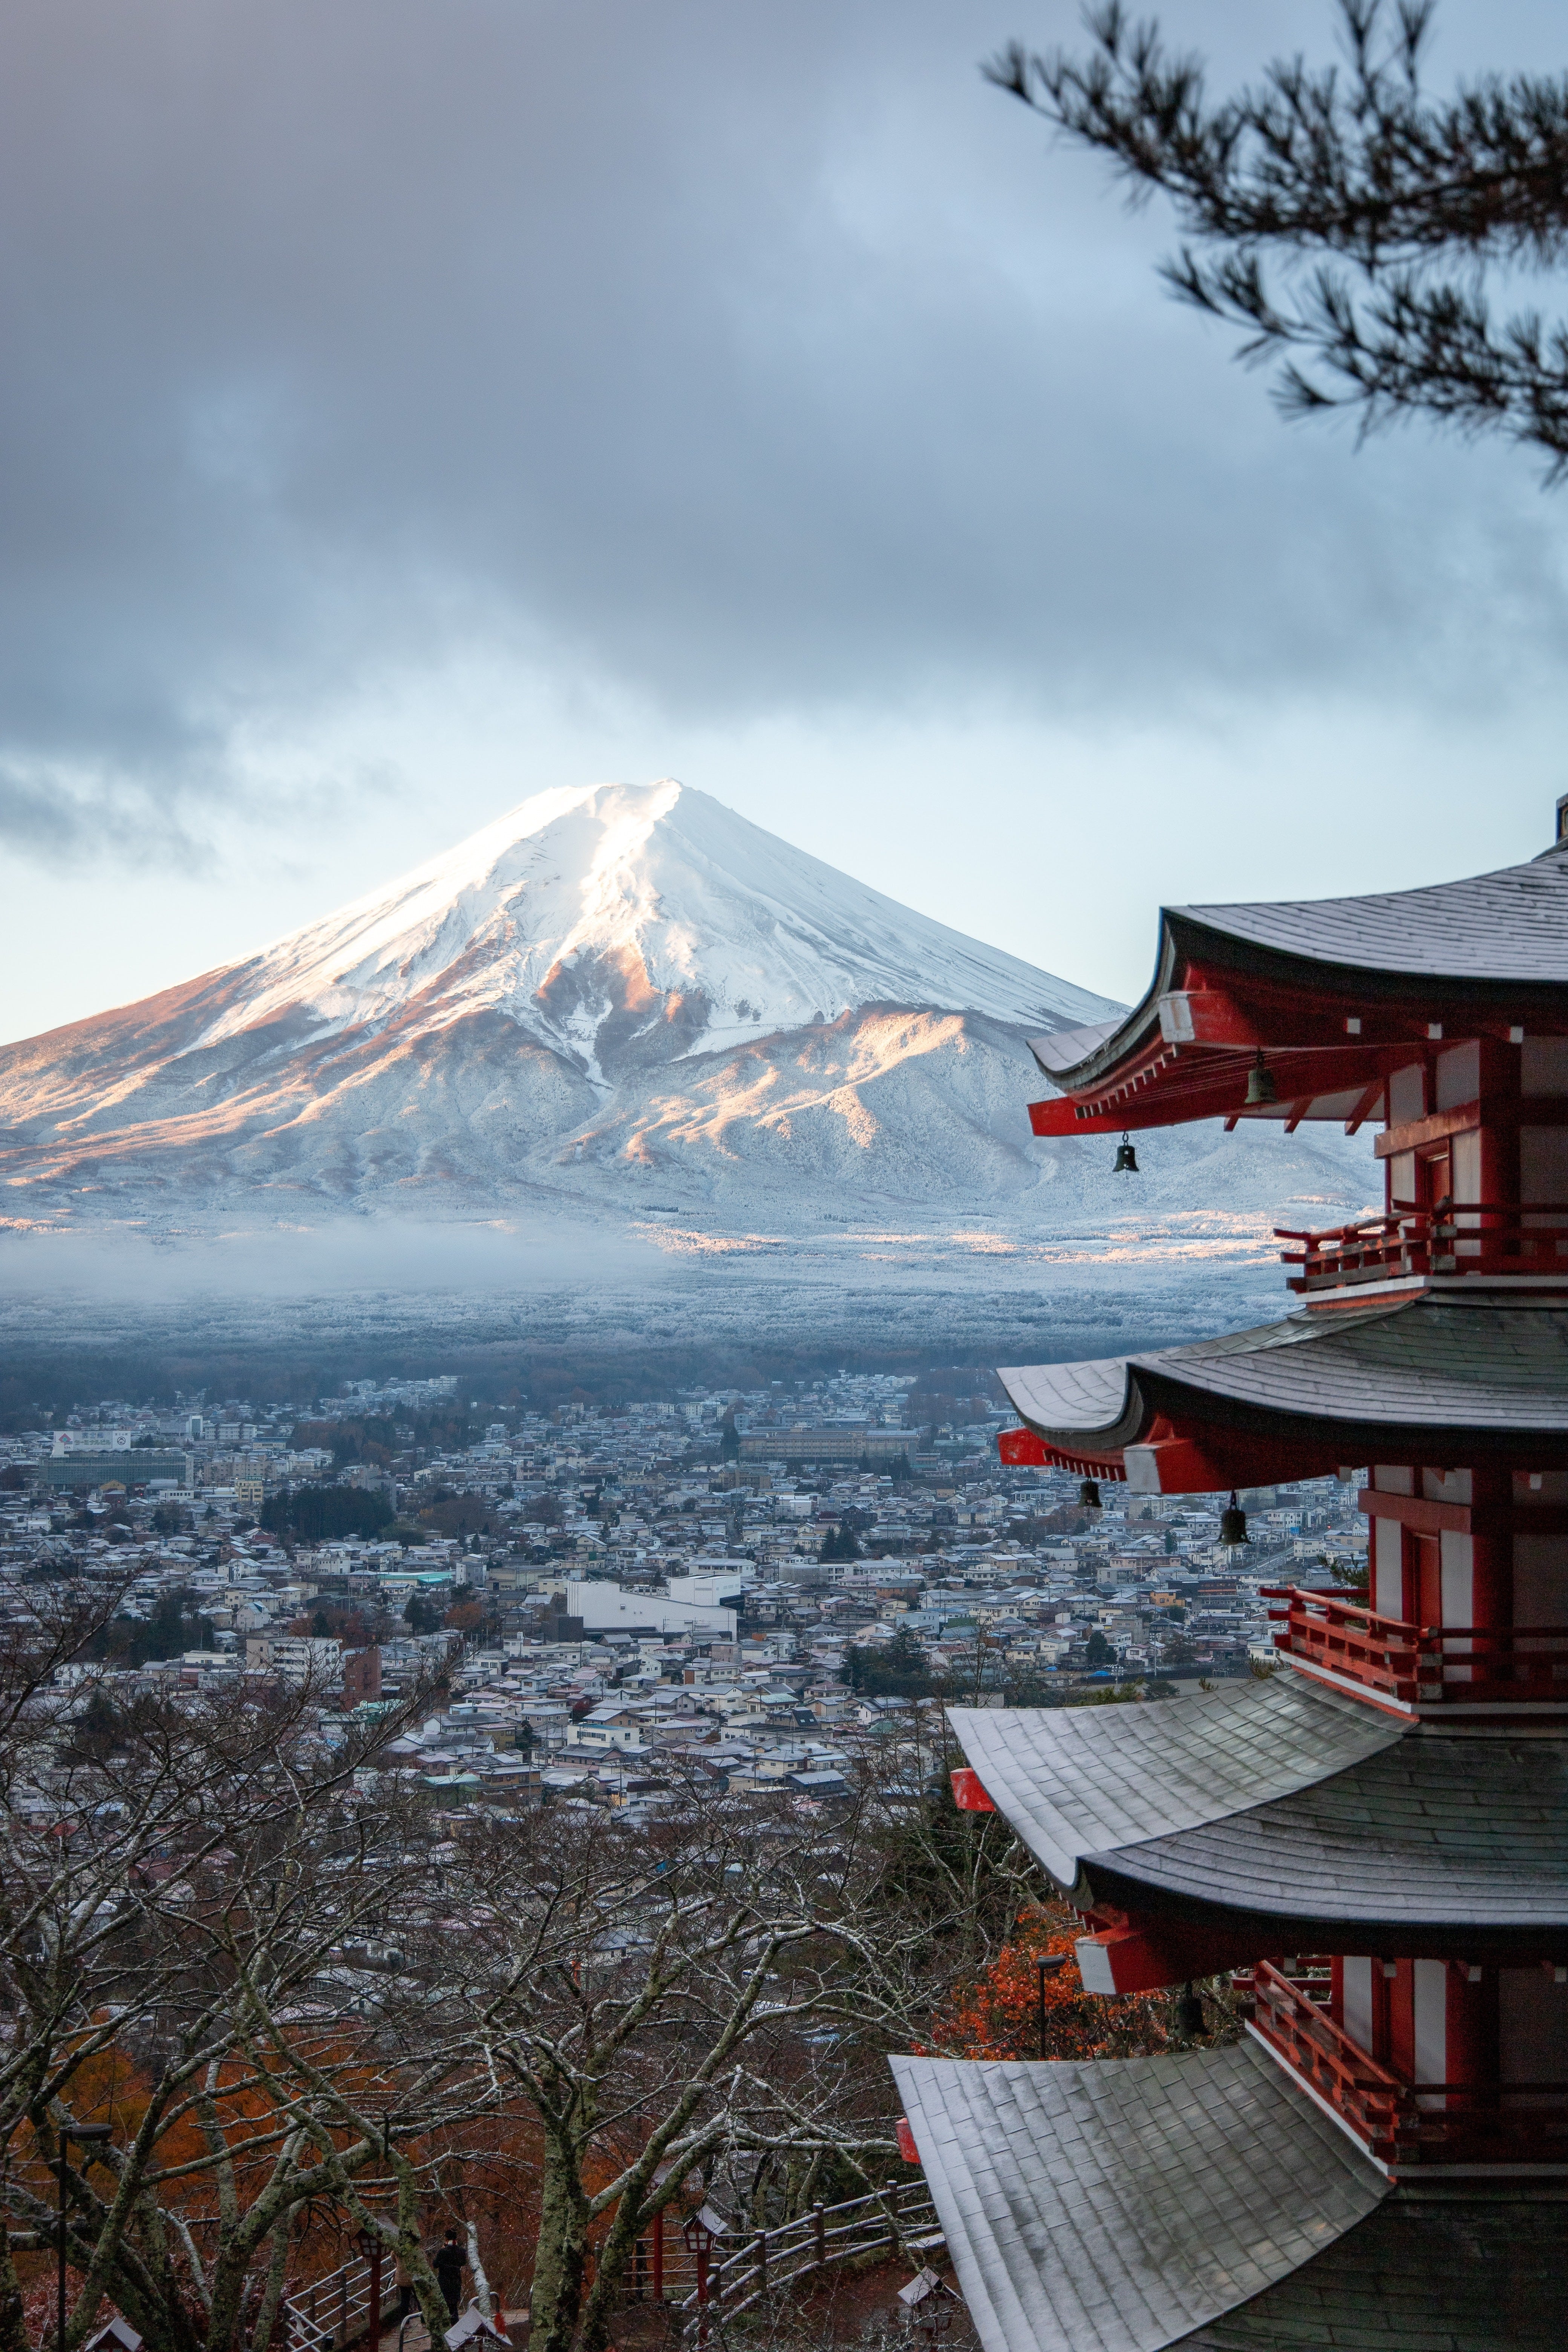 Book today for an enchanting journey through the snowy peaks of Japan.